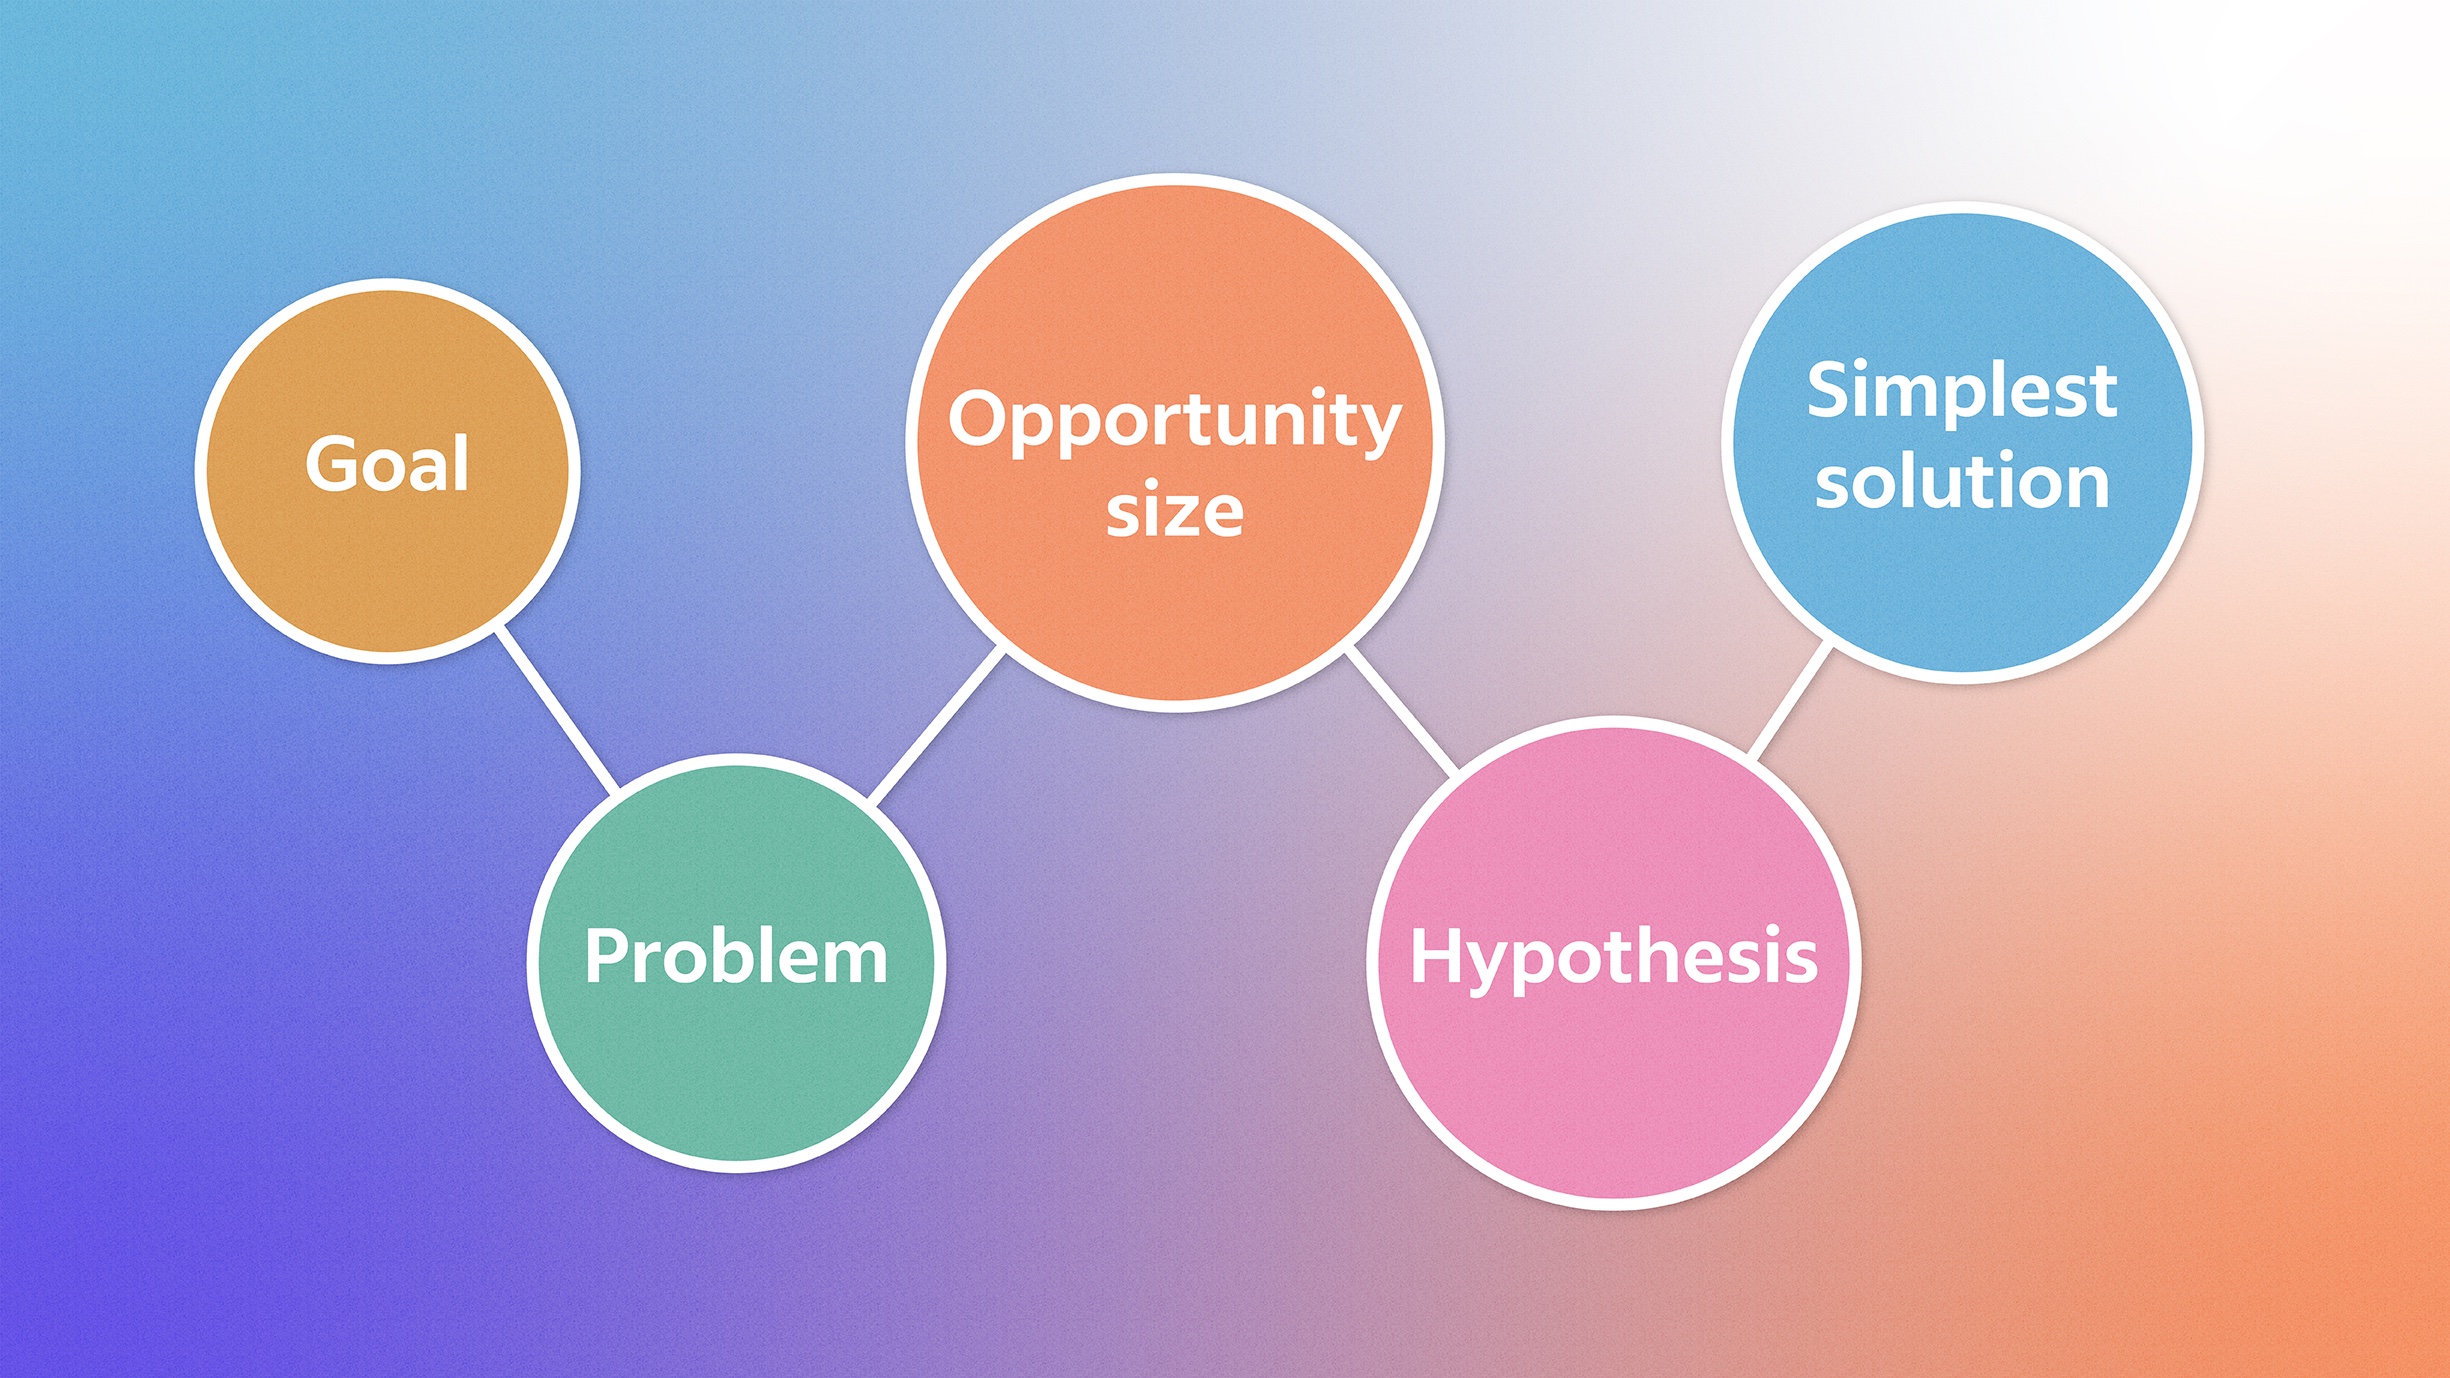 Text: The goal, the problem, the opportunity size, the hypothesis, the simplest solution